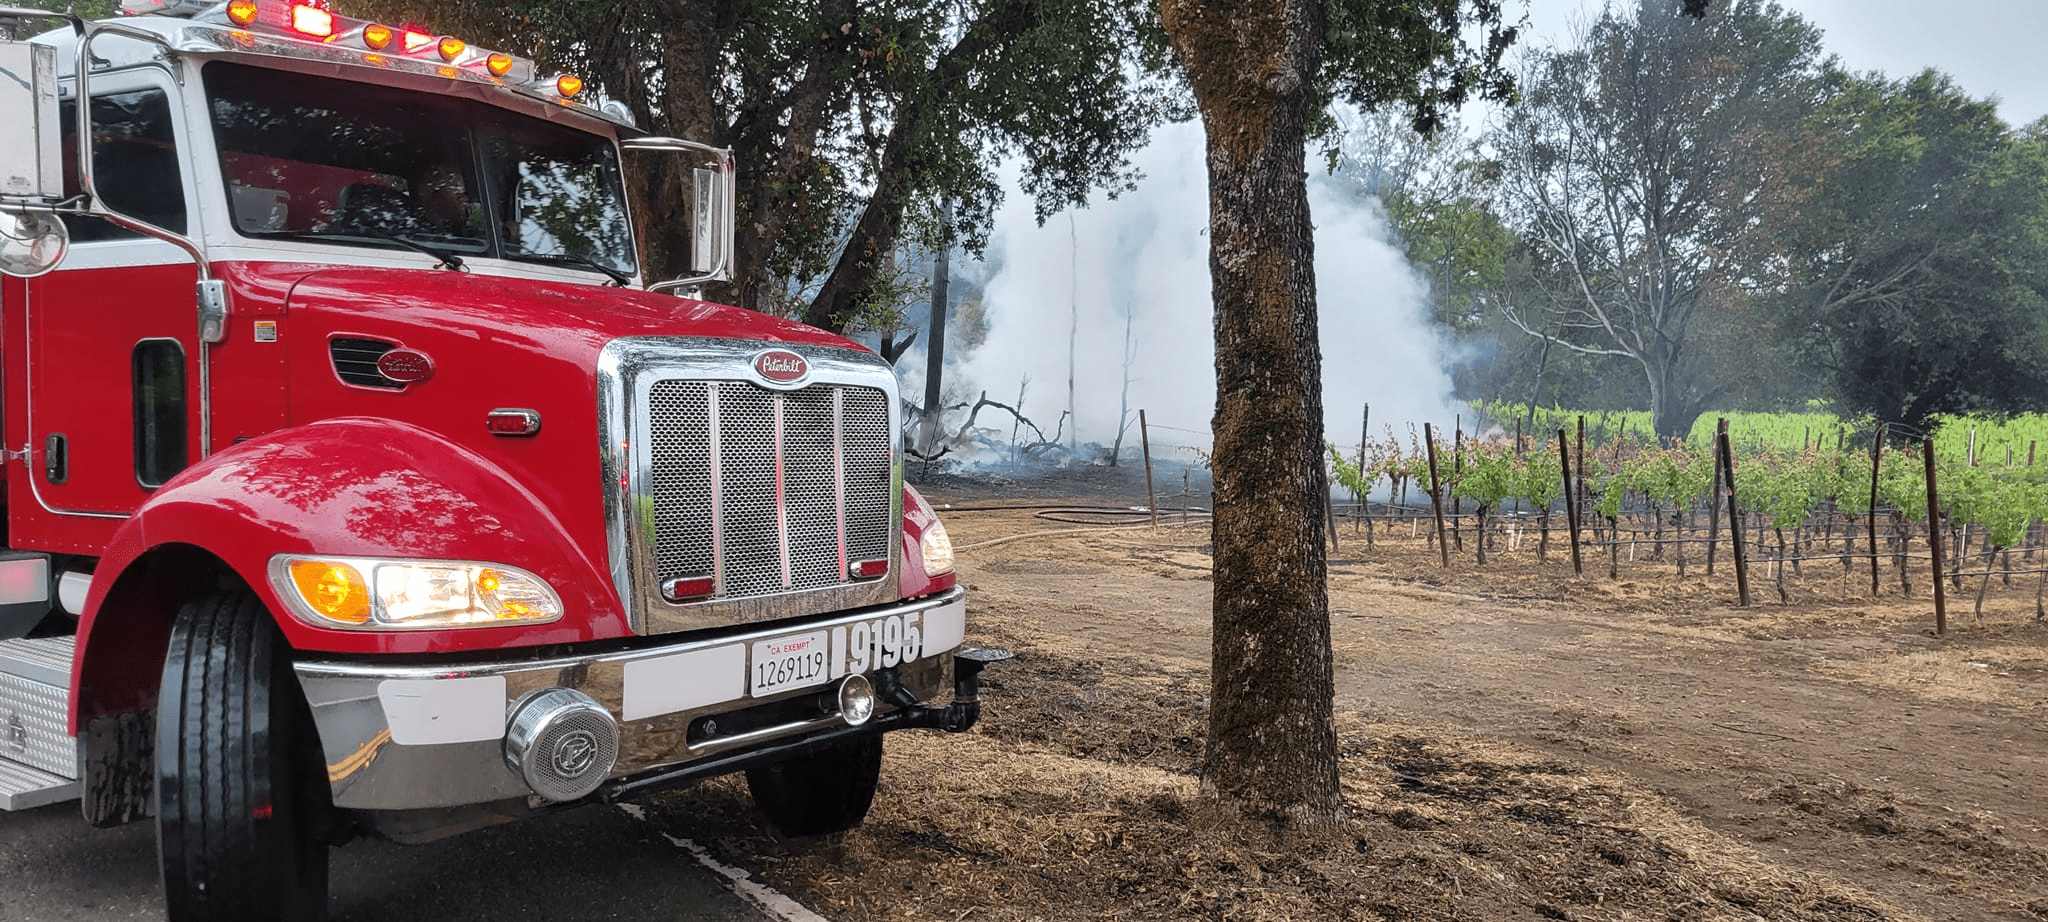 fire-in-geyserville-northern-sonoma-county-fire-district